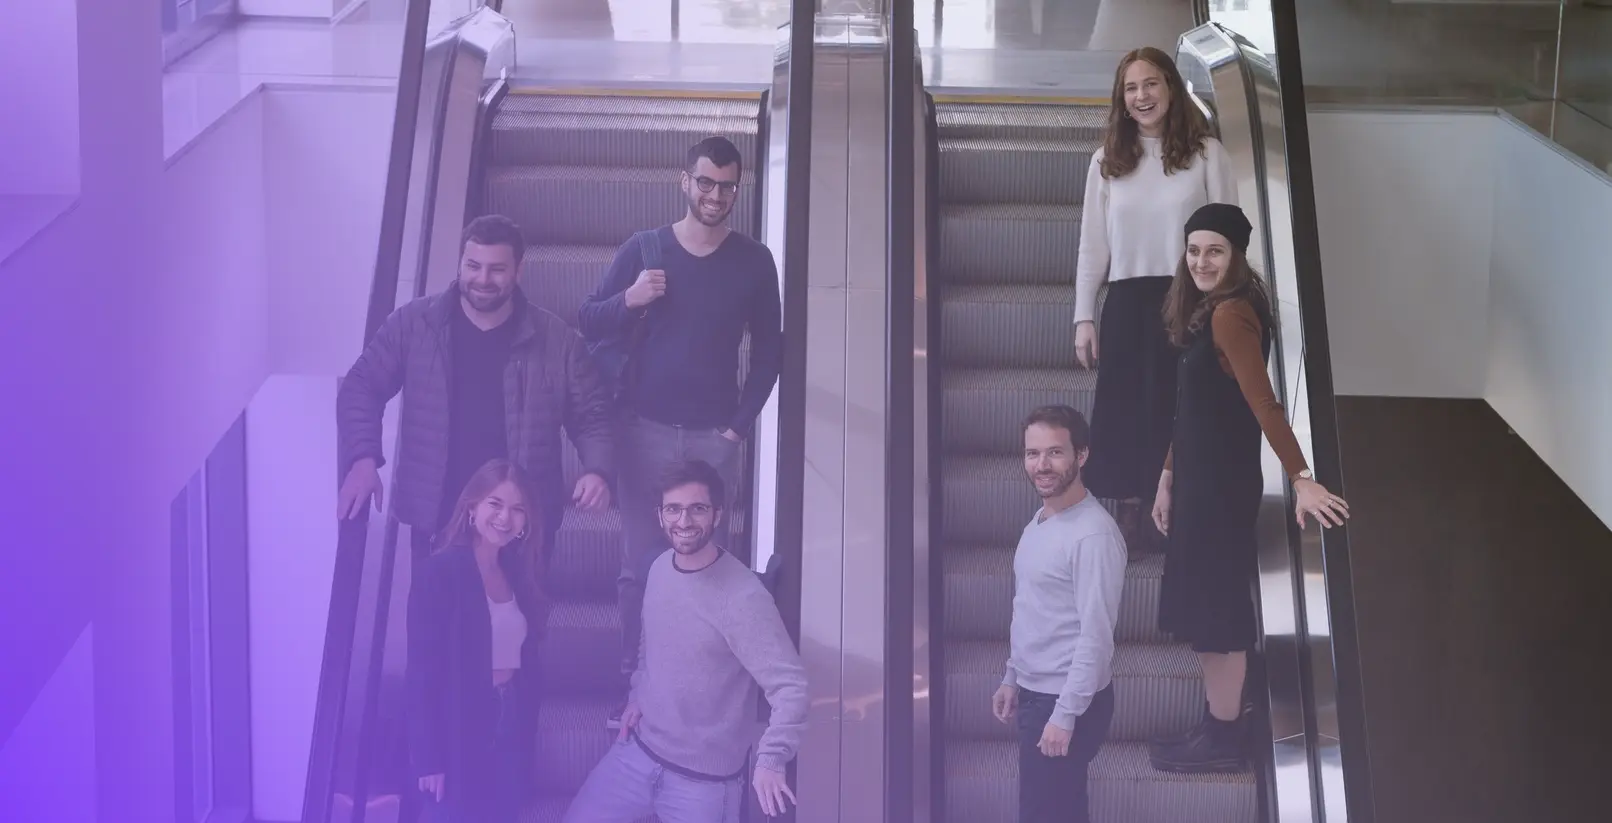 The team at concrete media working in the Jerusalem, Israel office of their B2B tech Public Relations agency.